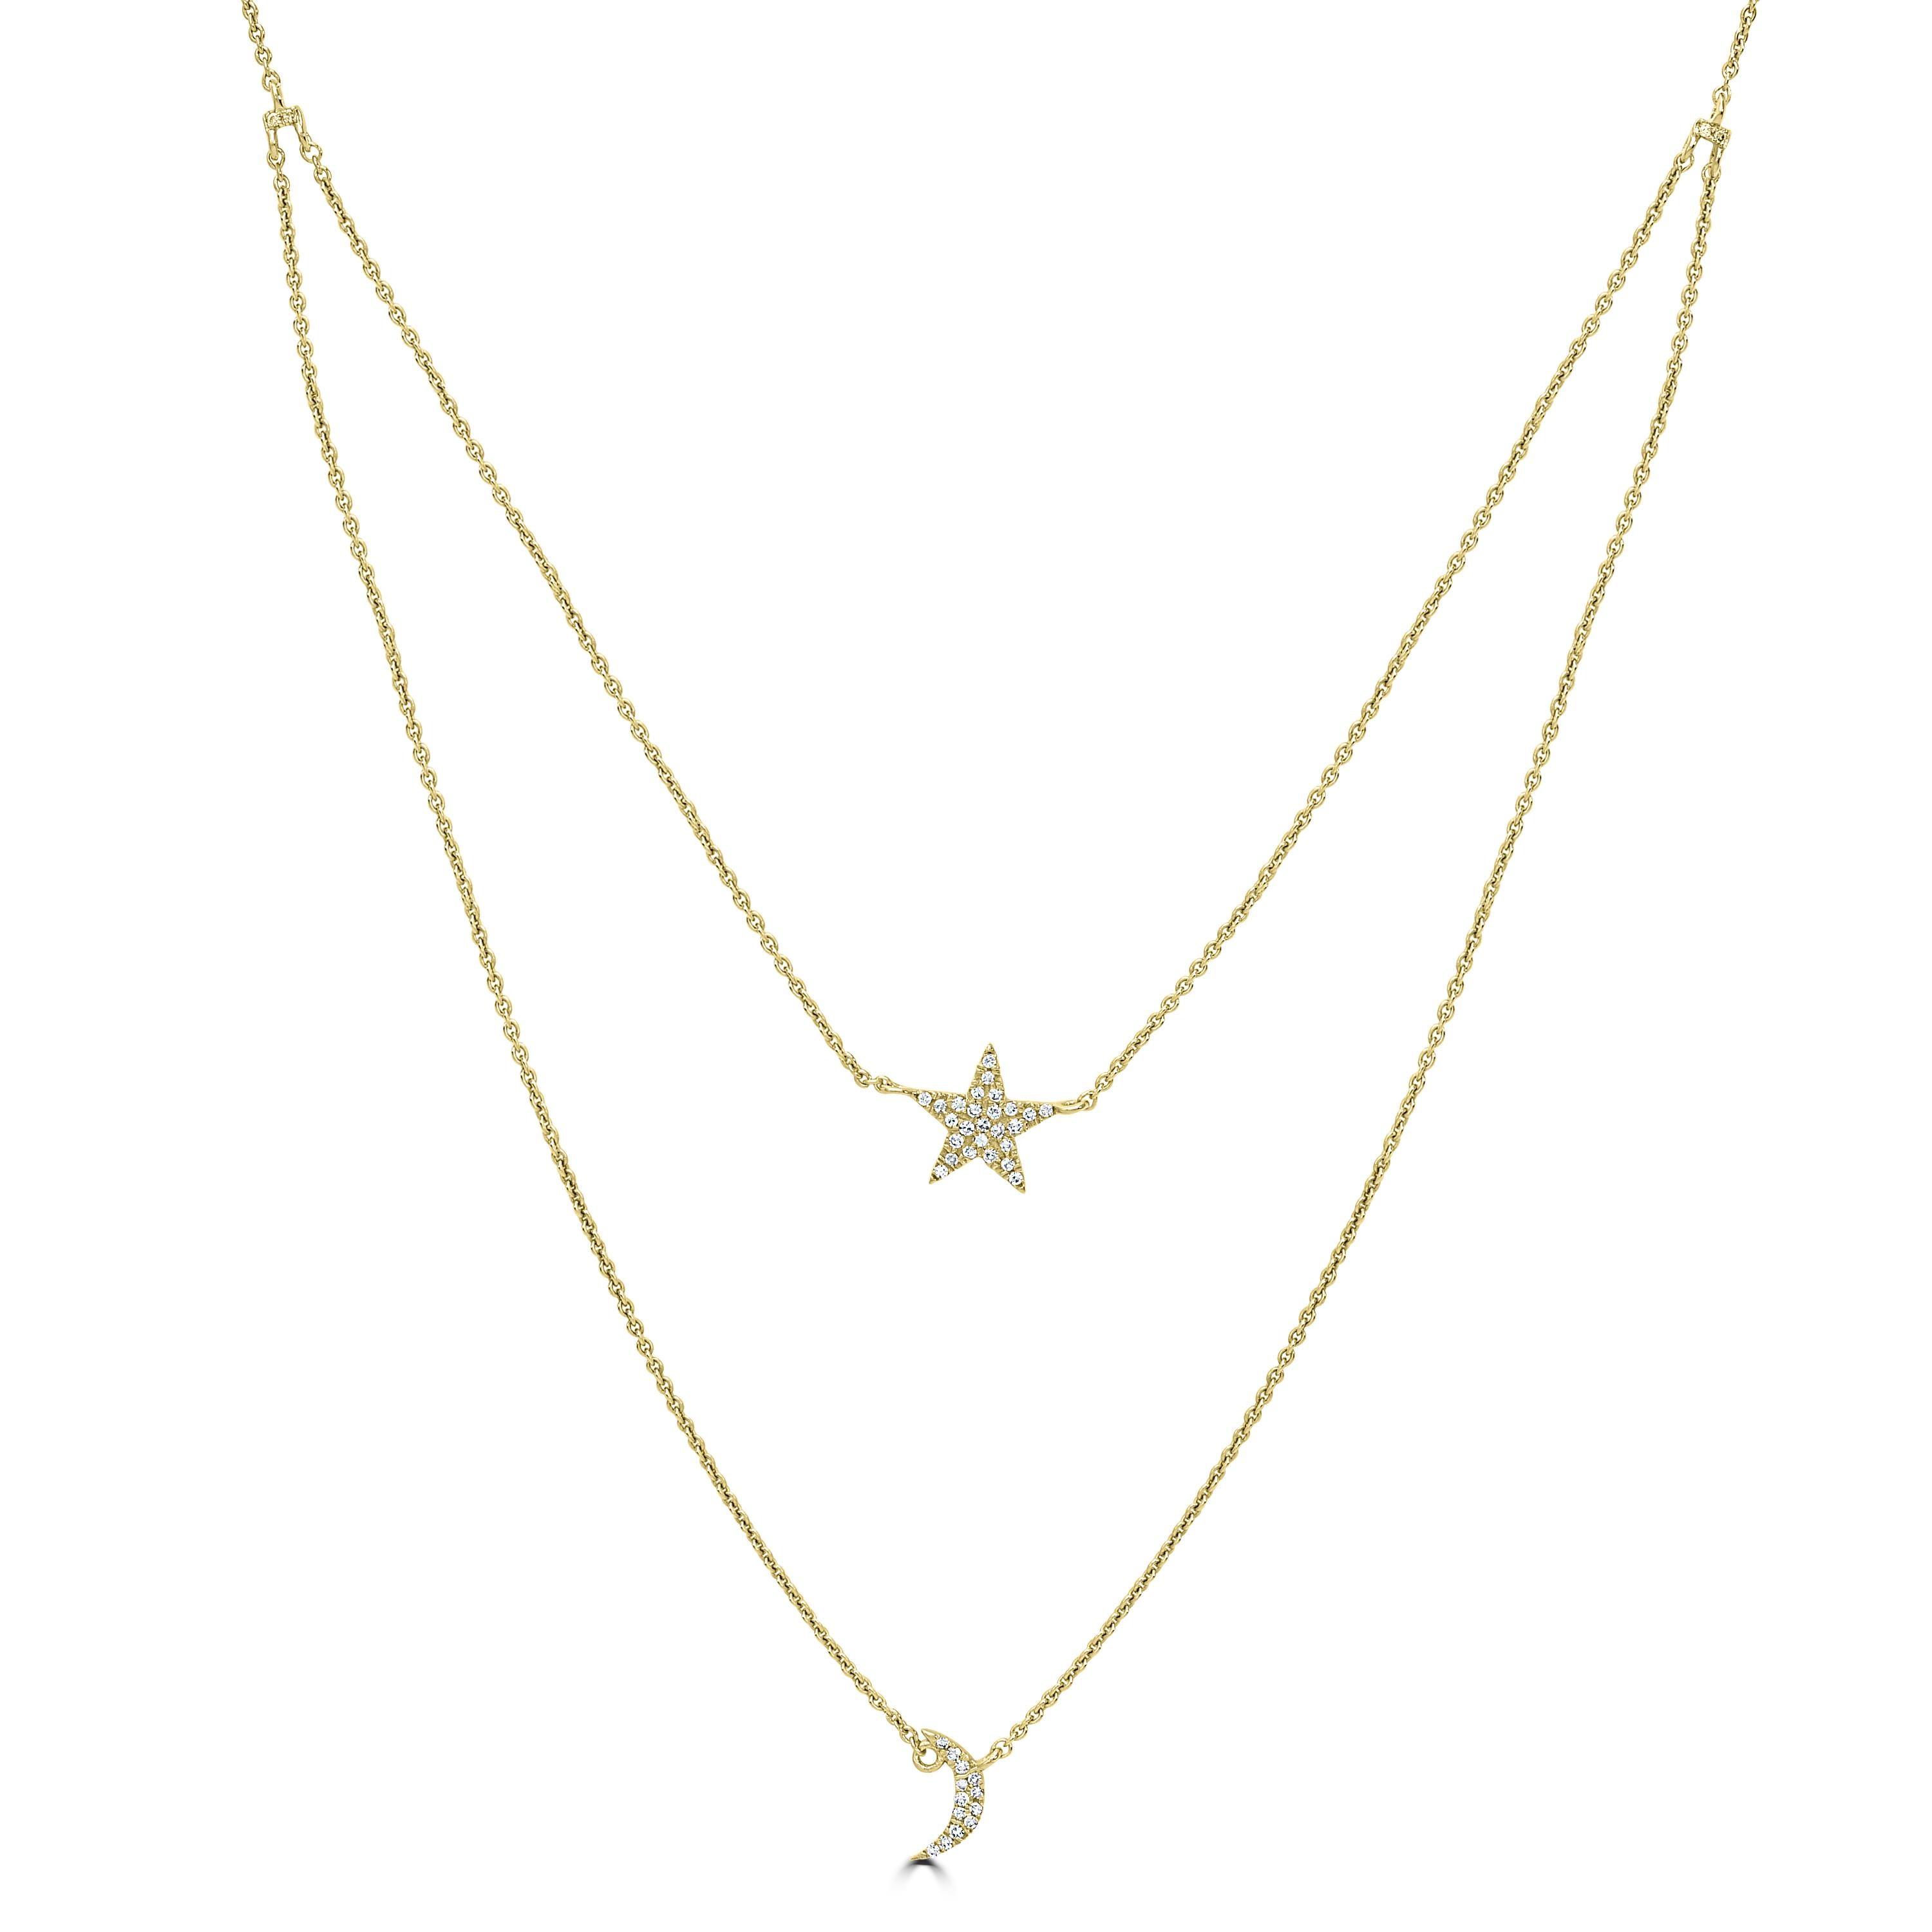 This Luxle double-strand necklace will melt your heart with its ideal blend of richness and inventiveness. This double-strand necklace features star and moon-shaped motifs hung from a gold chain. The motifs are made of 14K yellow gold and are set